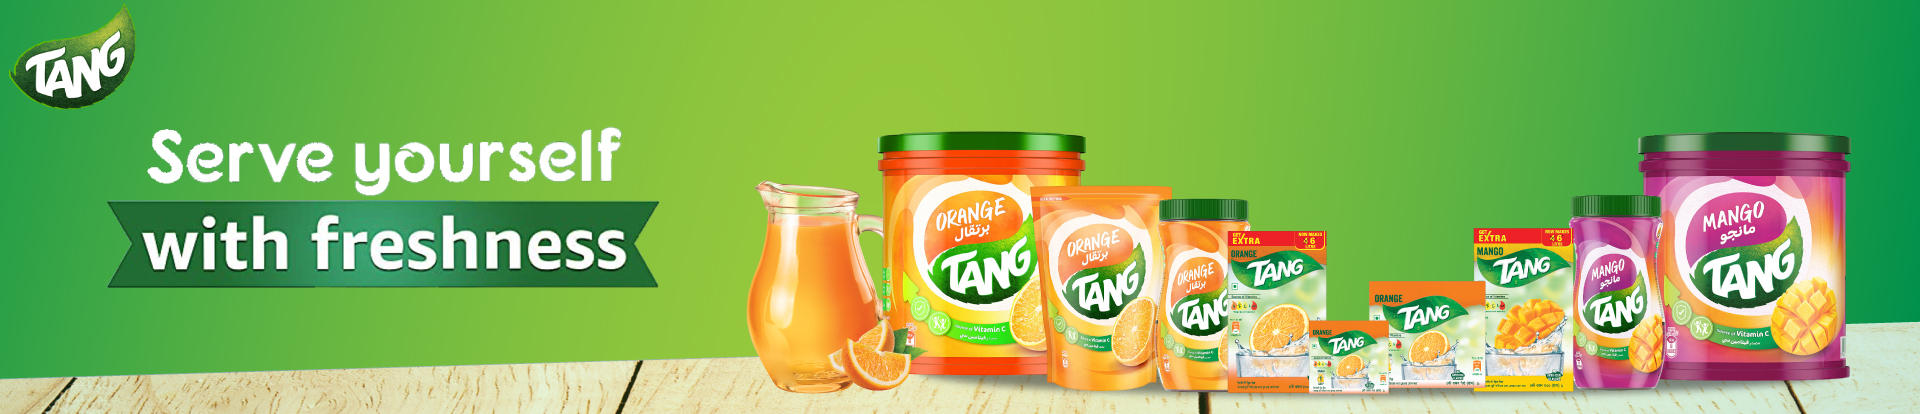 Picture for brand Tang